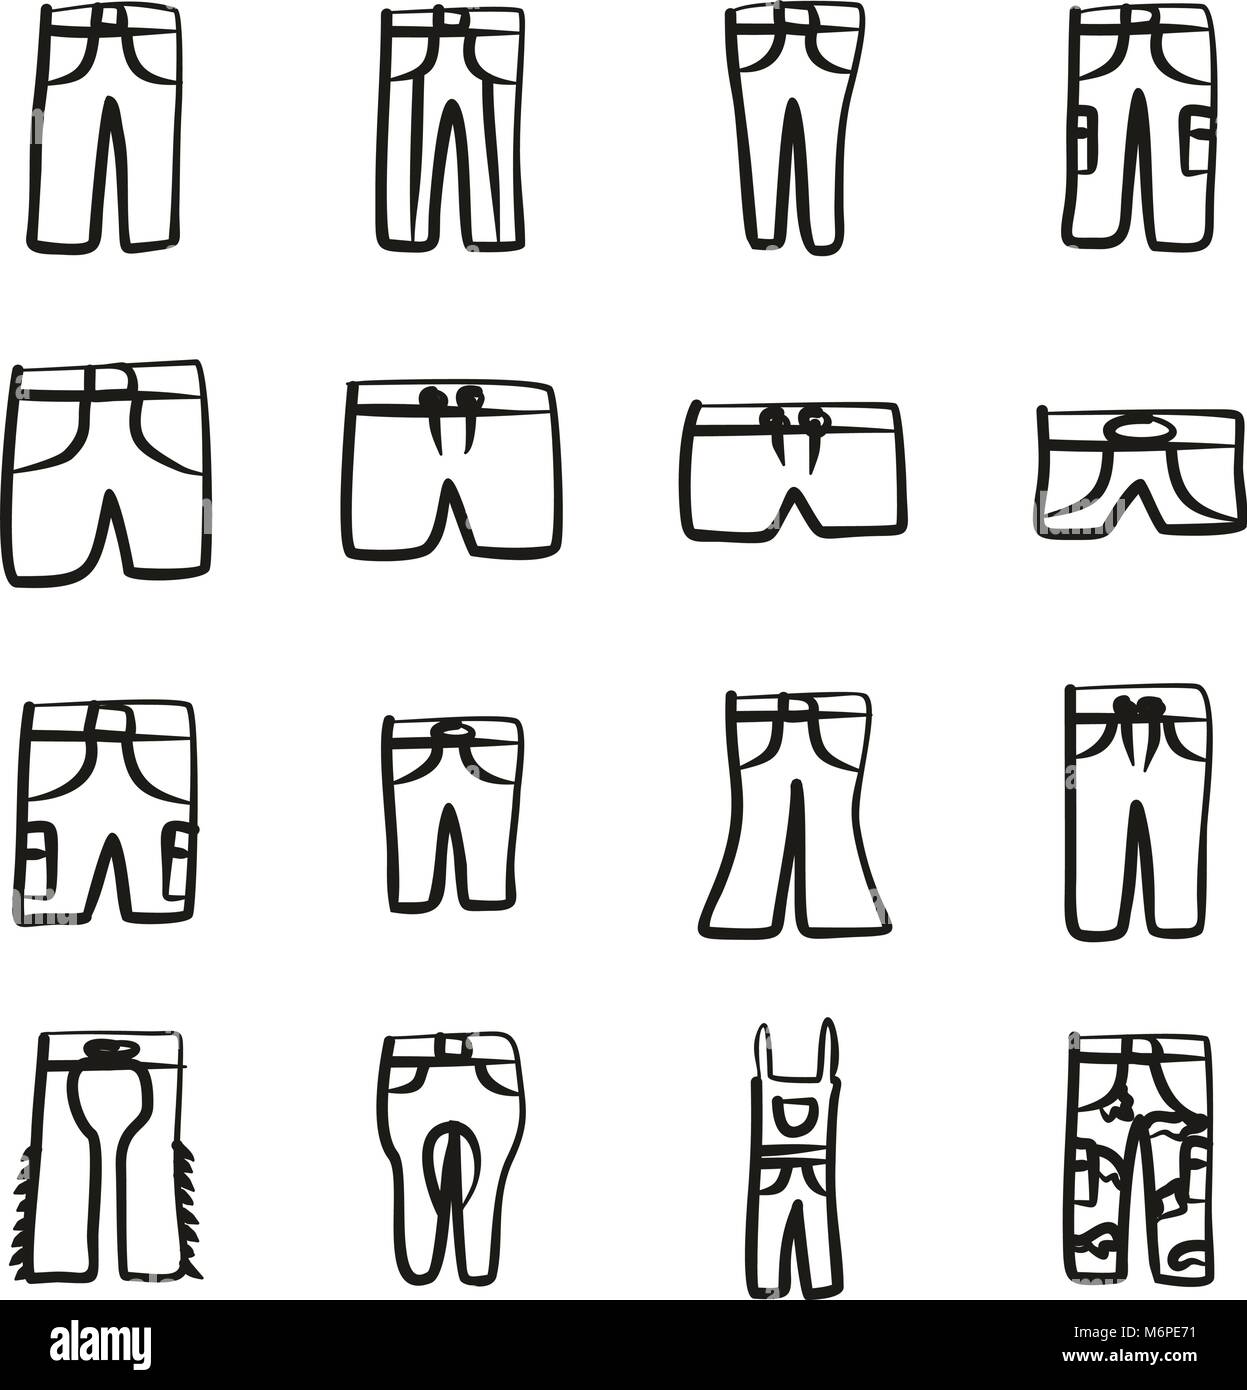 Pants Icons Freehand Stock Vector